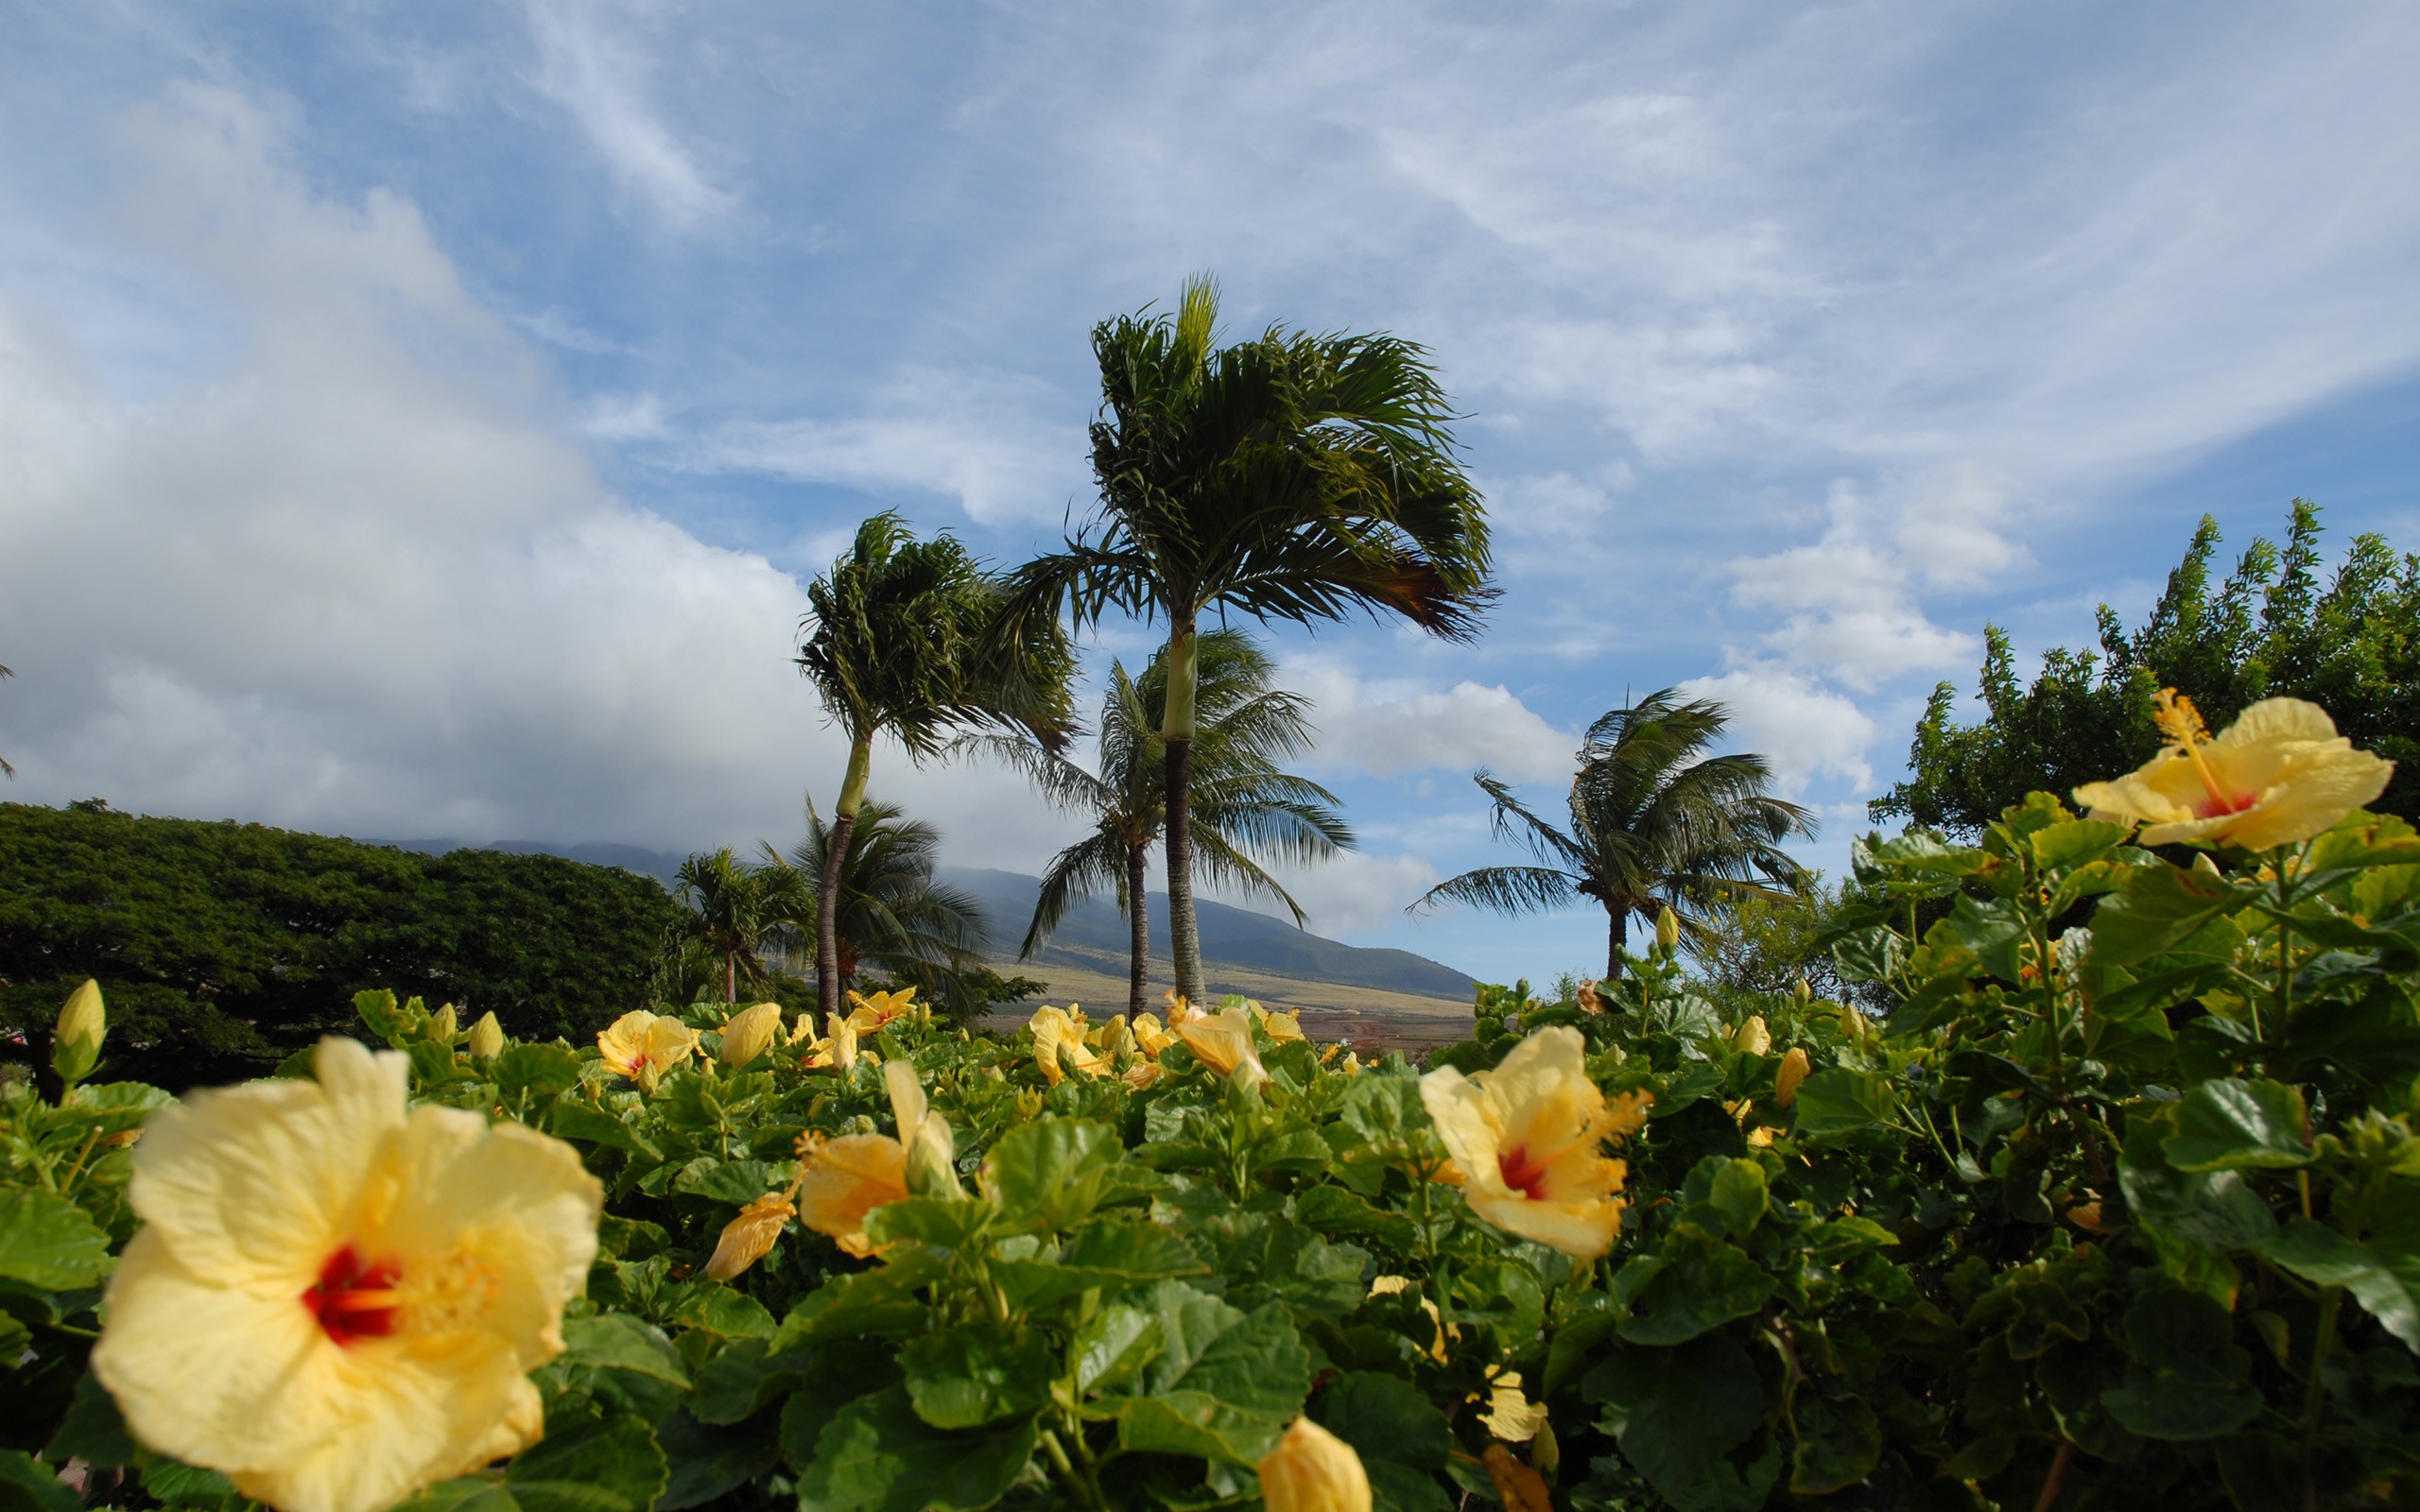 clouds, landscapes, nature, trees, planets, hibiscus, yellow flowers - desktop wallpaper